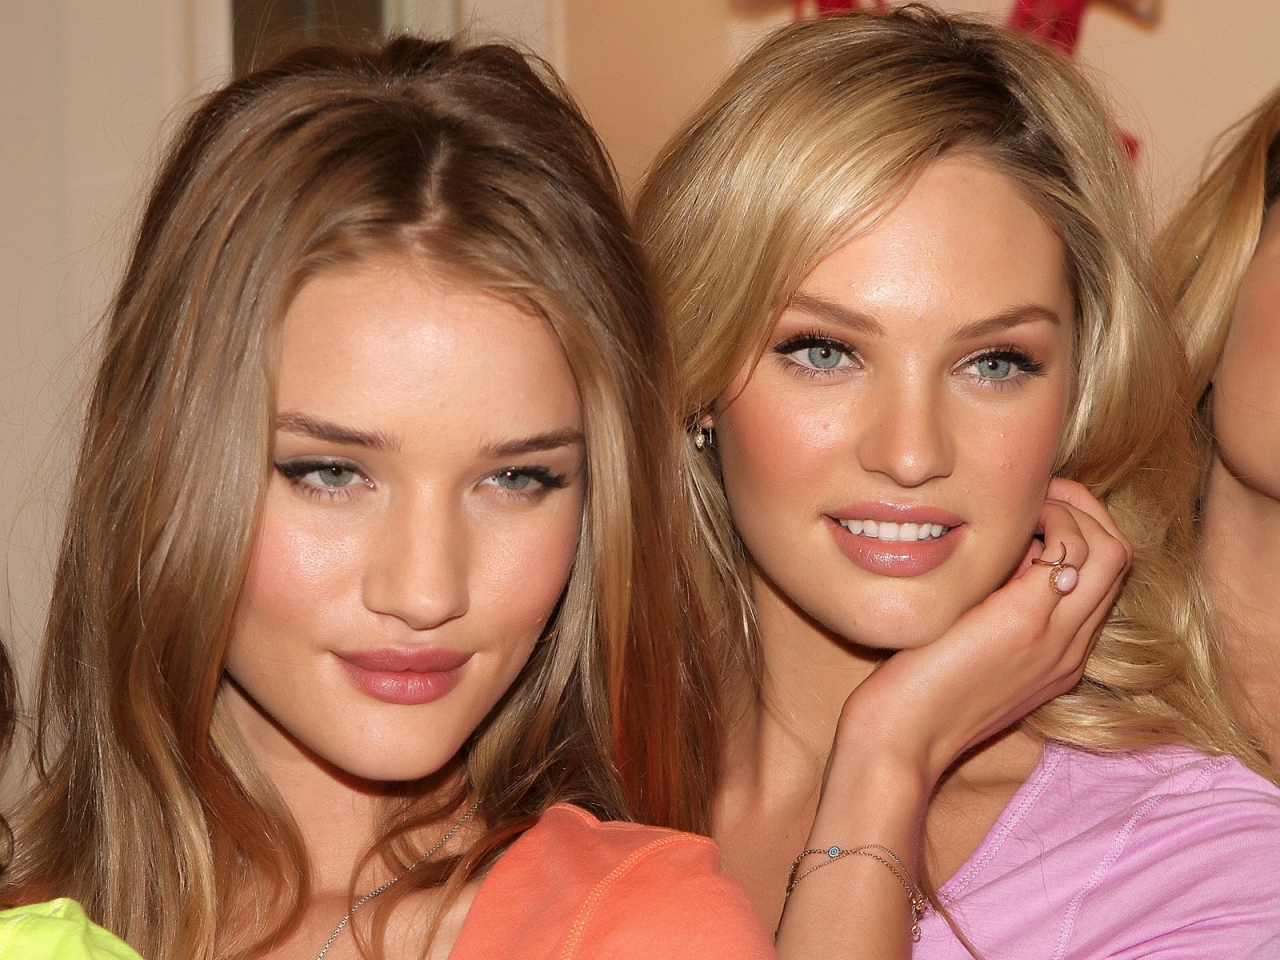 Rosie and Candice for 1280 x 960 resolution